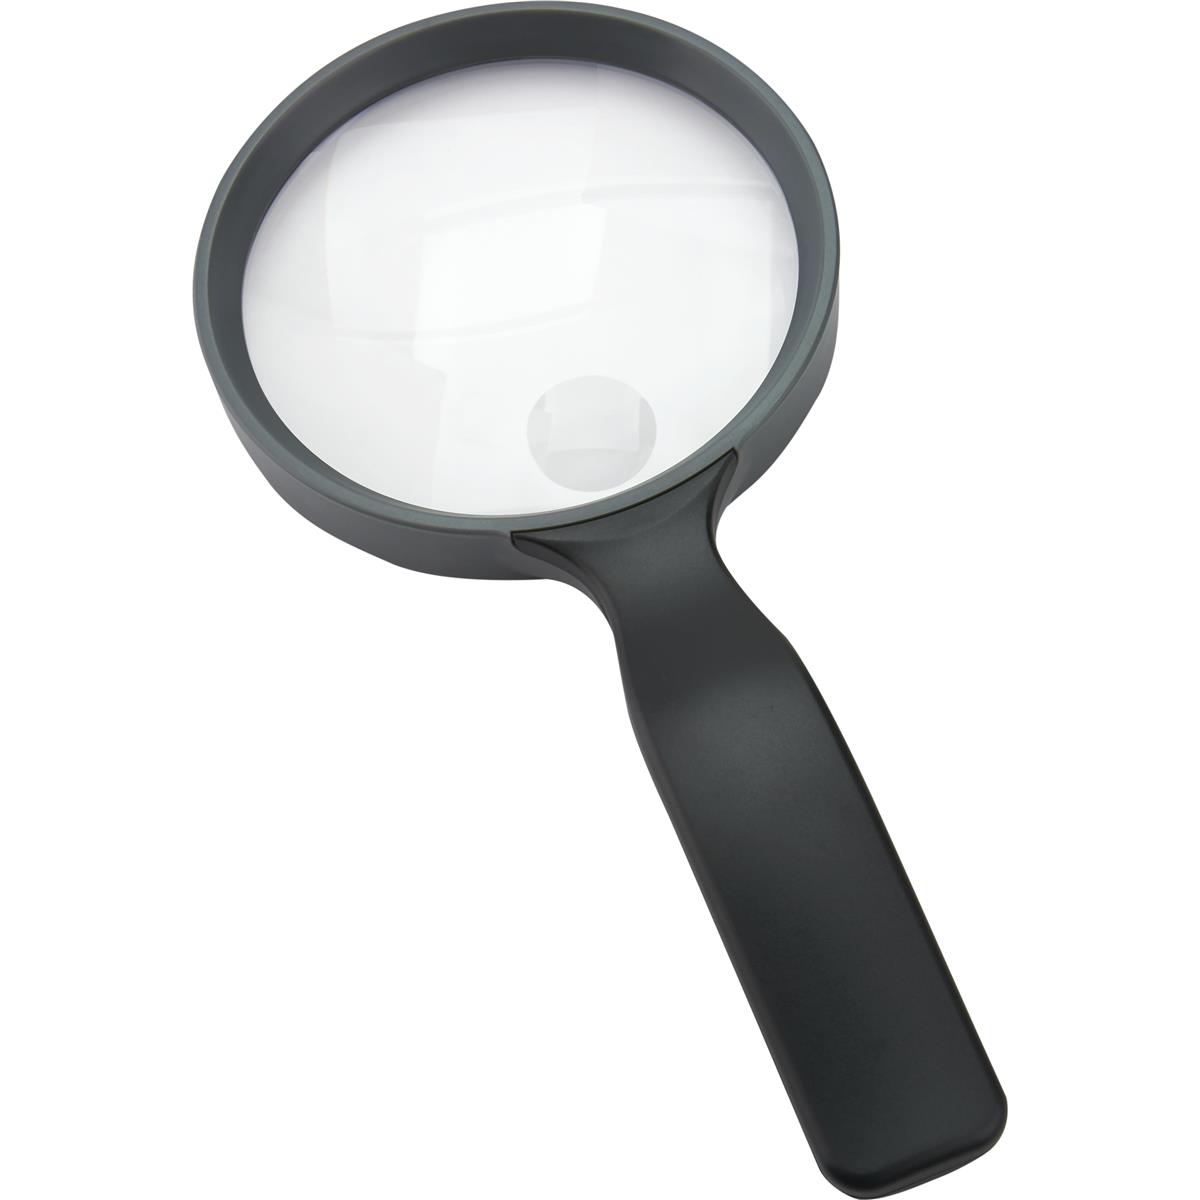 Image of Carson JS24 2x HandHeld Series Magnifier with 3.5x Power Bifocal Spot Lens